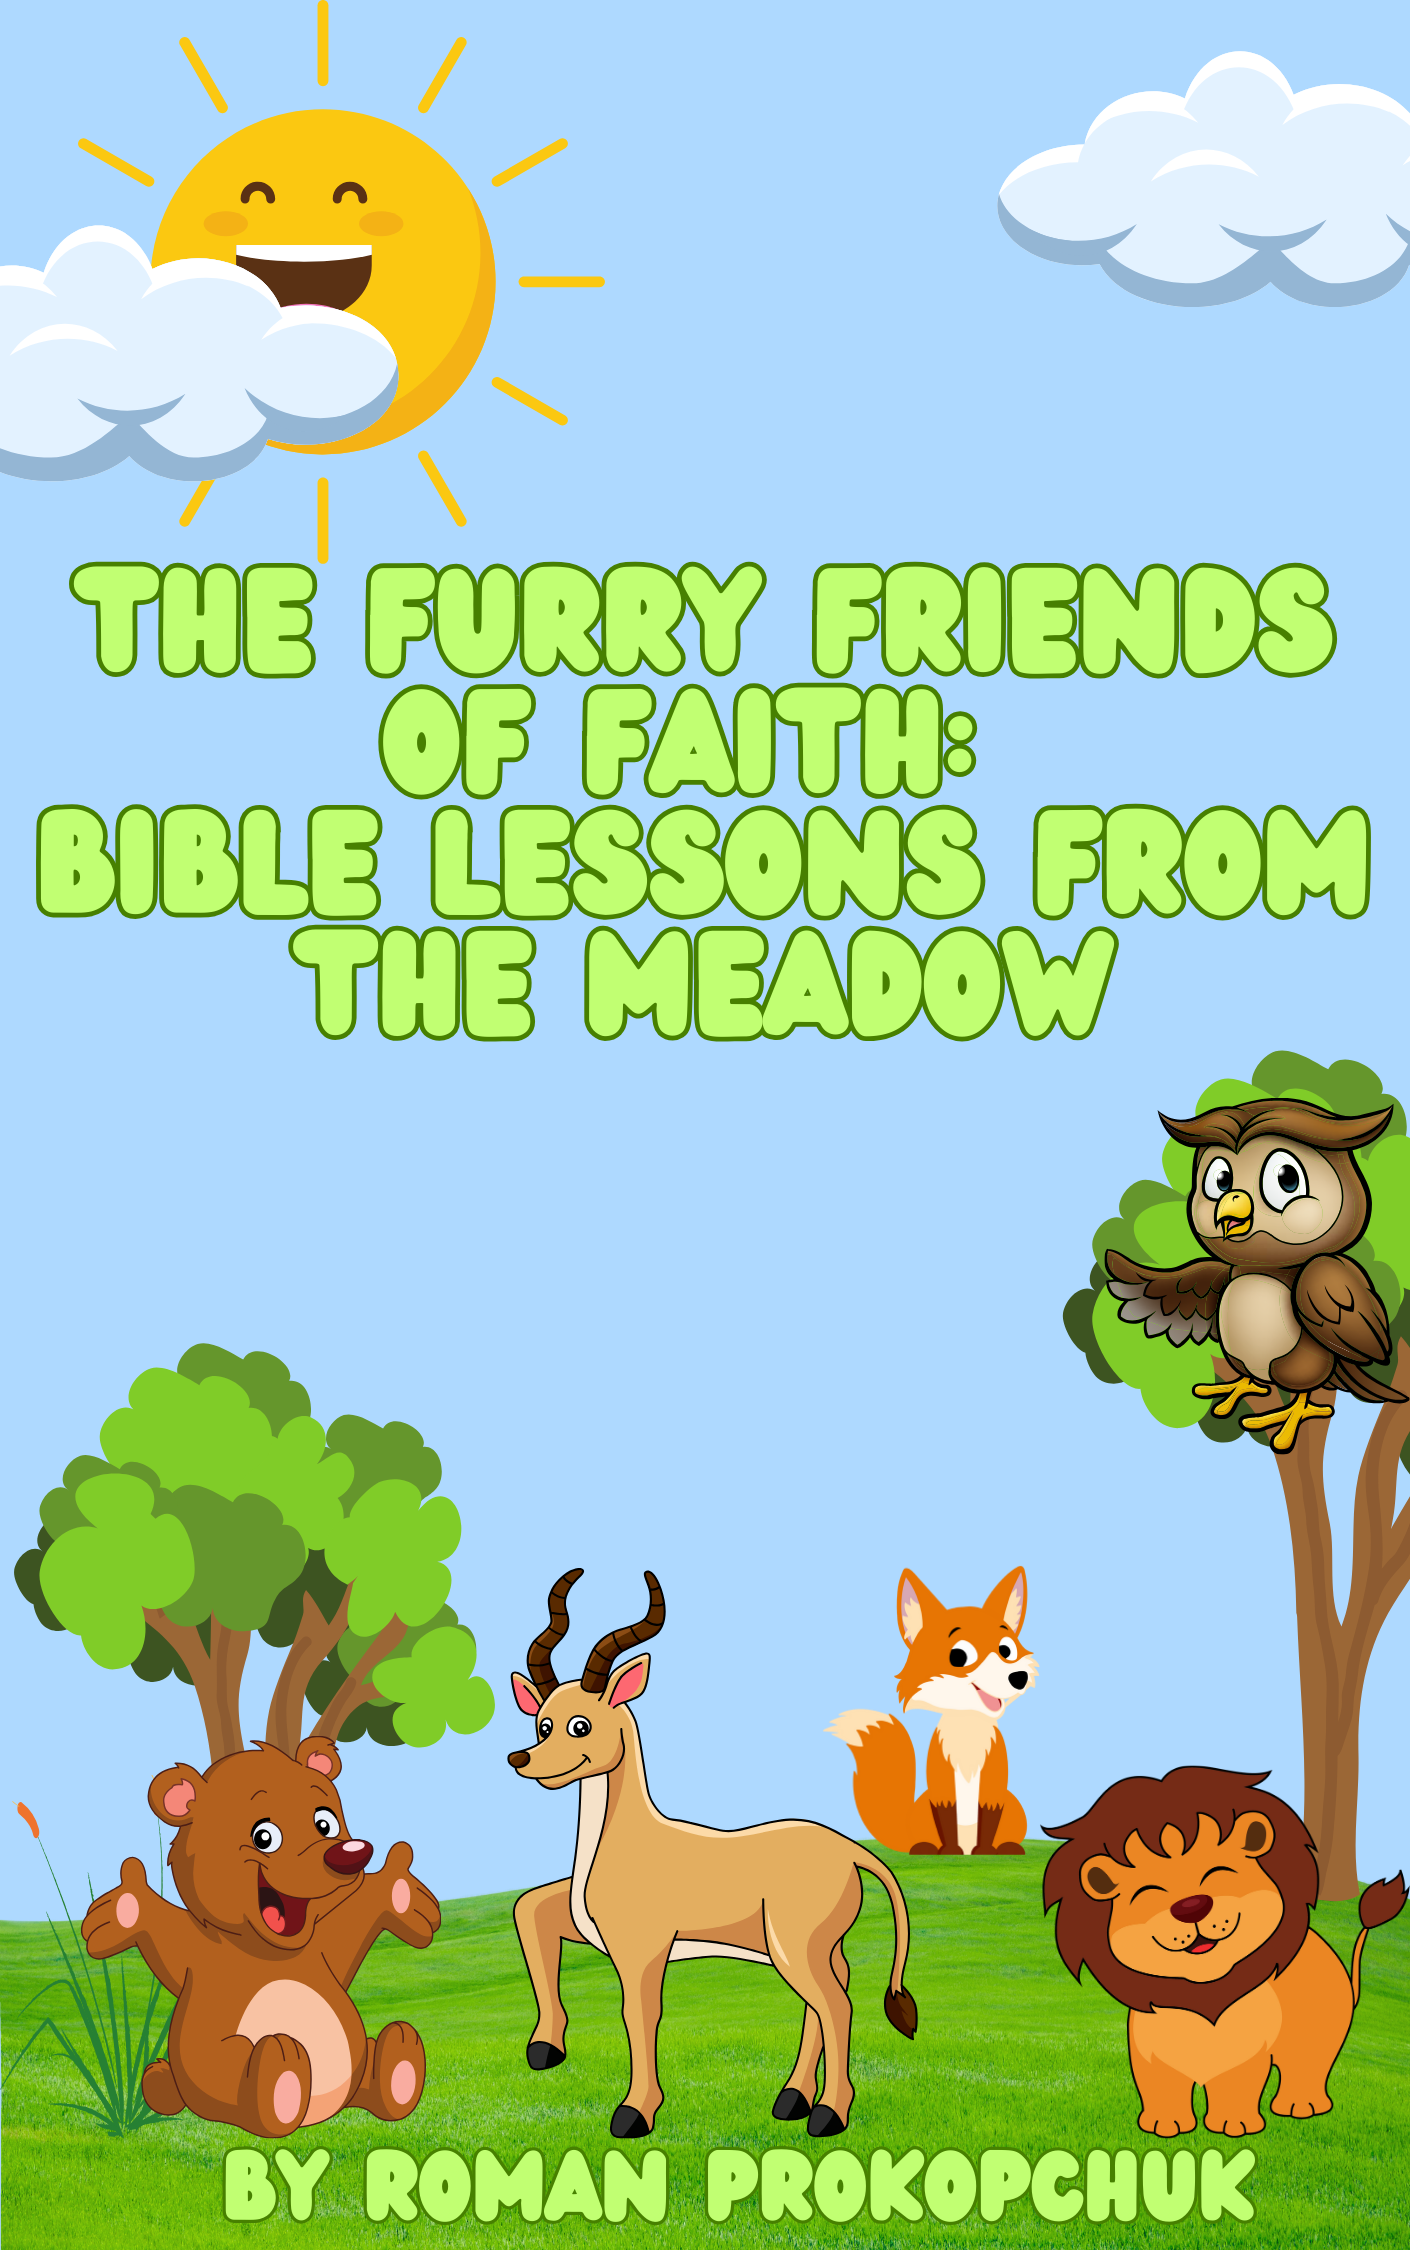 Roman Prokopchuk Authors First Children's Book The Furry Friends of Faith: Bible Lessons from the Meadow